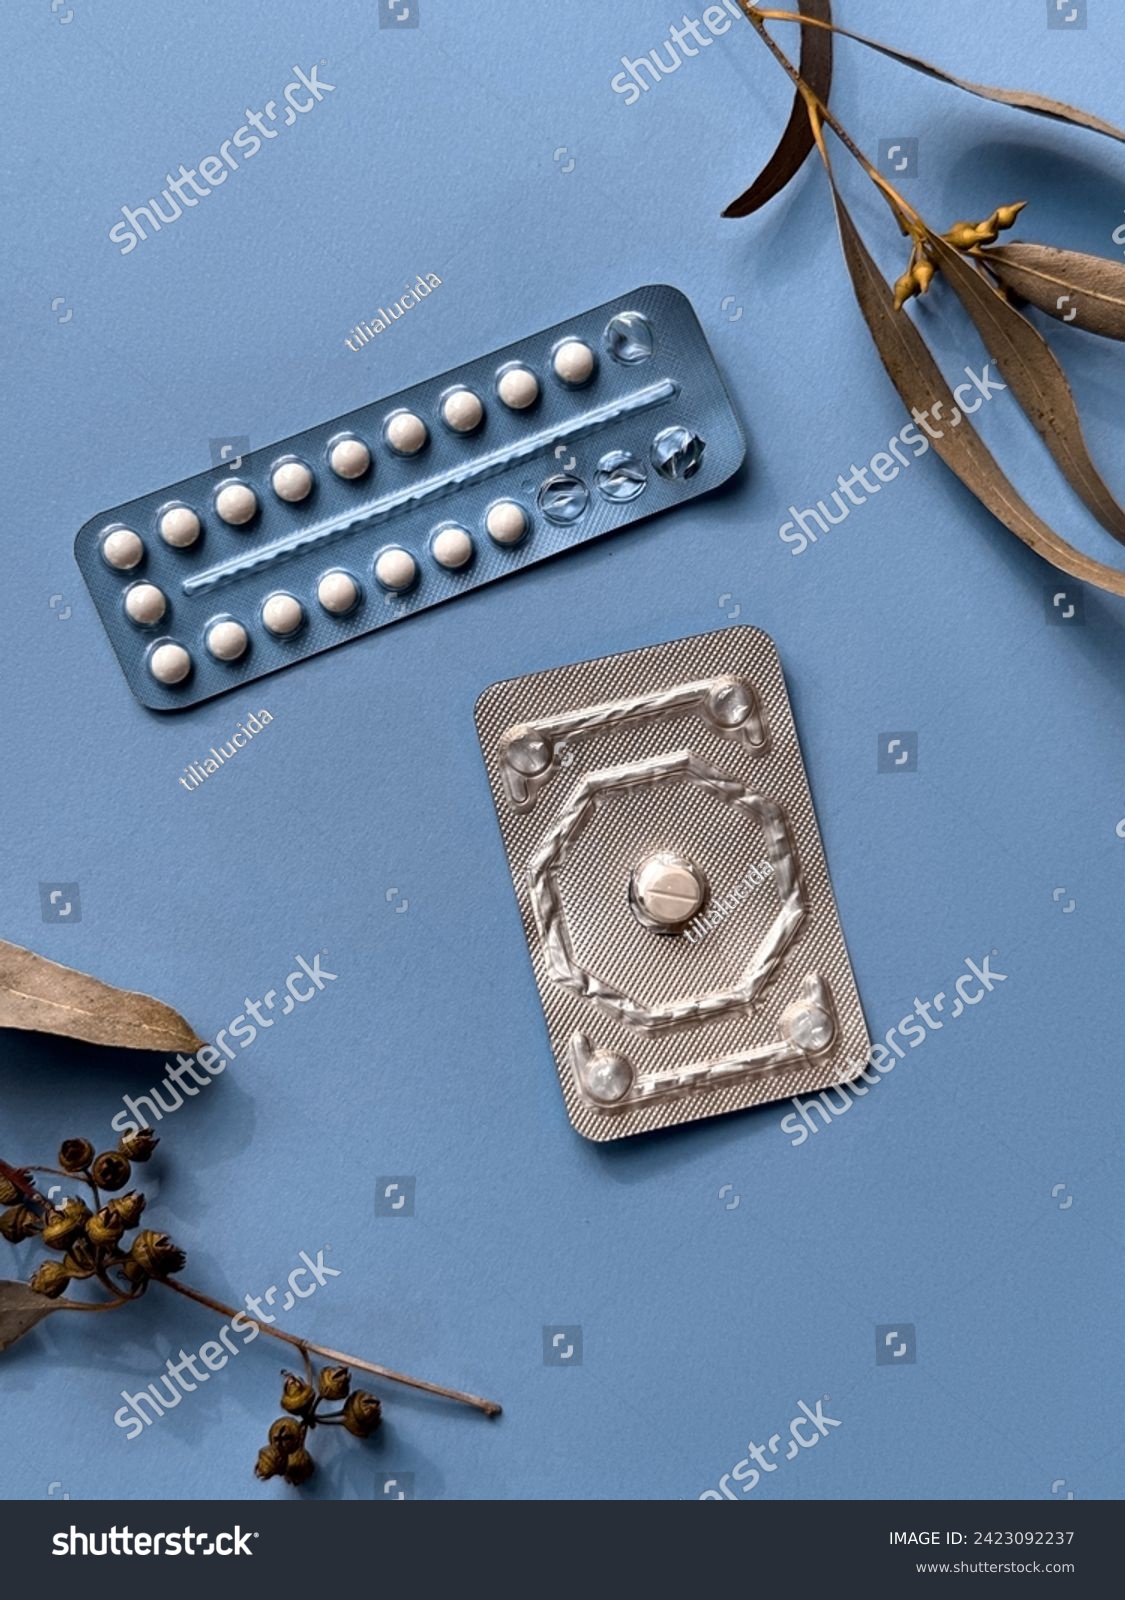 Two different packs of contraceptive pills on colored paper background with eucalyptus leaves, overhead view. Monthly pack and a morning-after pill, illustrating concept of modern female health. #2423092237